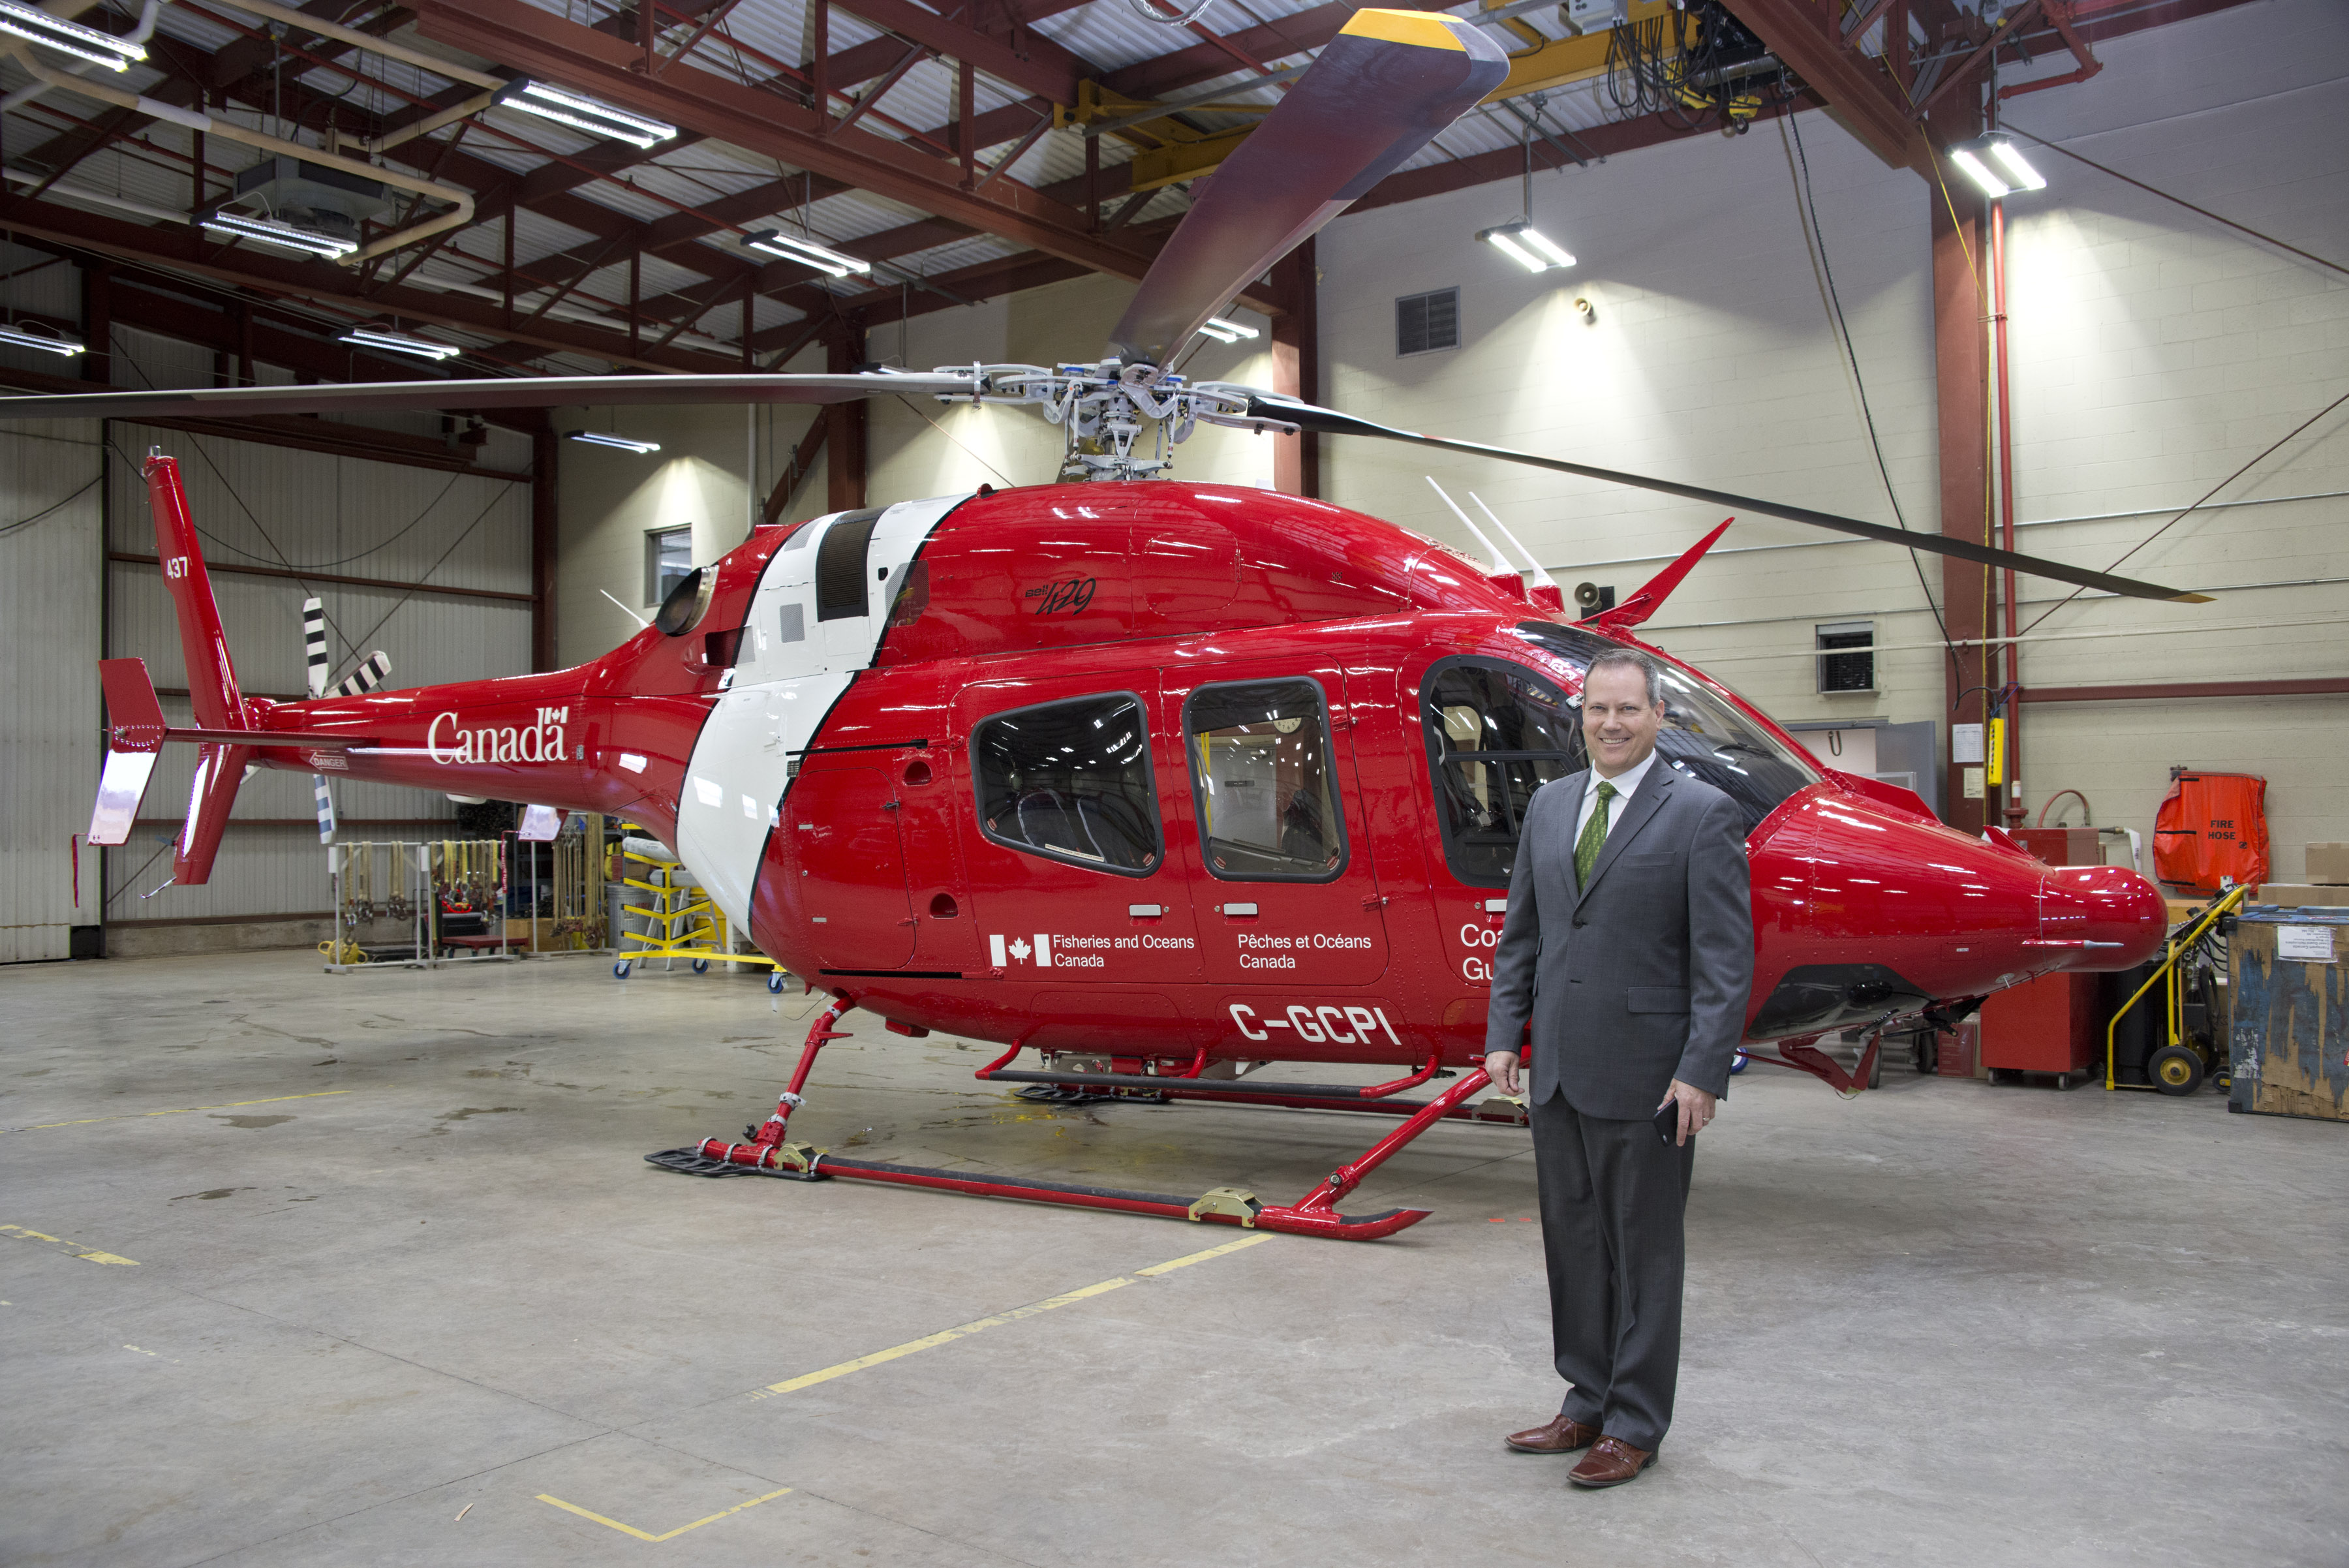 Darren Fisher, Member of Parliament for Dartmouth-Cole Harbour, was on hand at the Canadian Coast Guard hanger at 12 Wing Shearwater in Dartmouth NS to inspect the Coast Guard¿s newest helicopter, the Bell Light-Lift 429. The helicopter is used to support Coast Guard operations in the Maritimes.